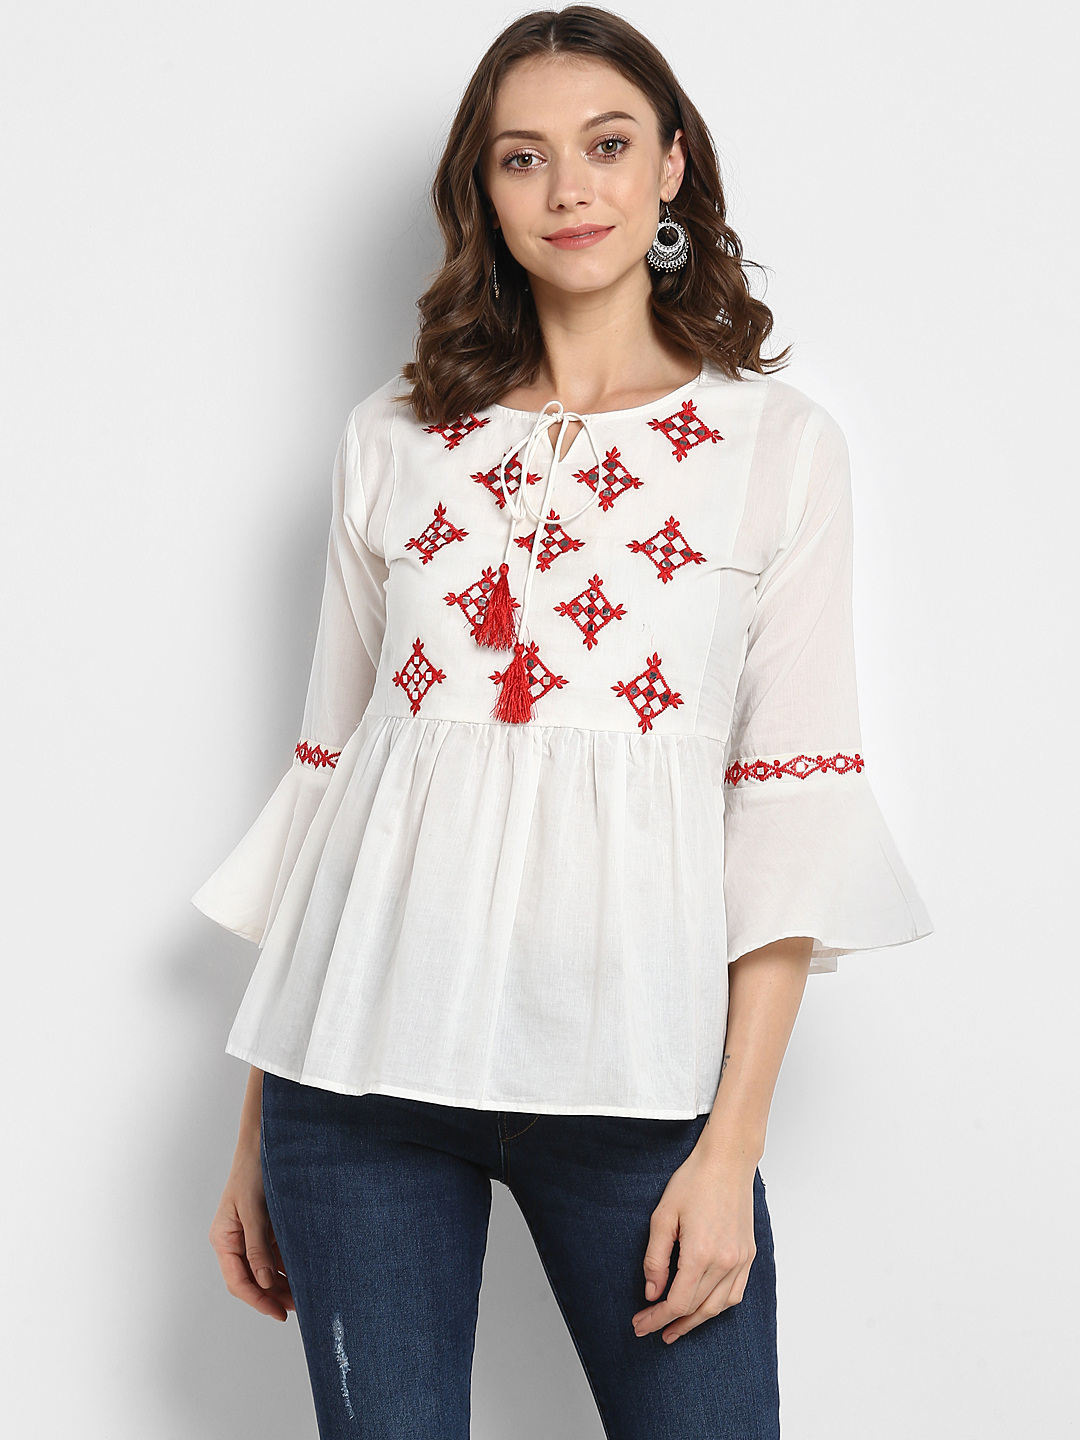 Women's  White Embellished A-Line Top - Wahe-NOOR